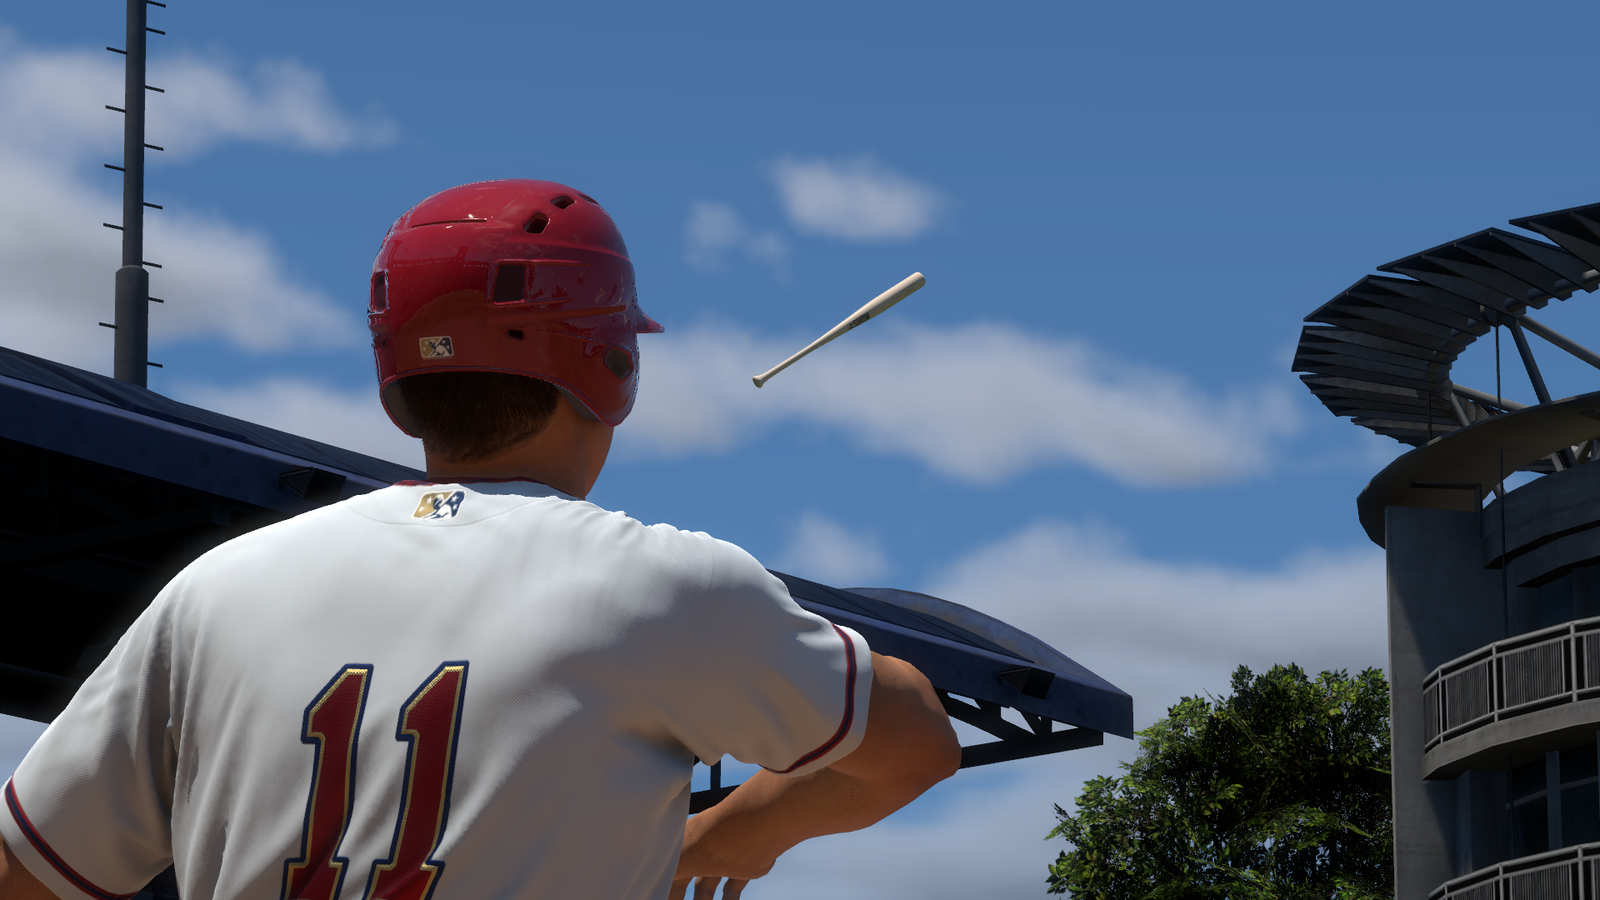 MLB The Show 23 release date